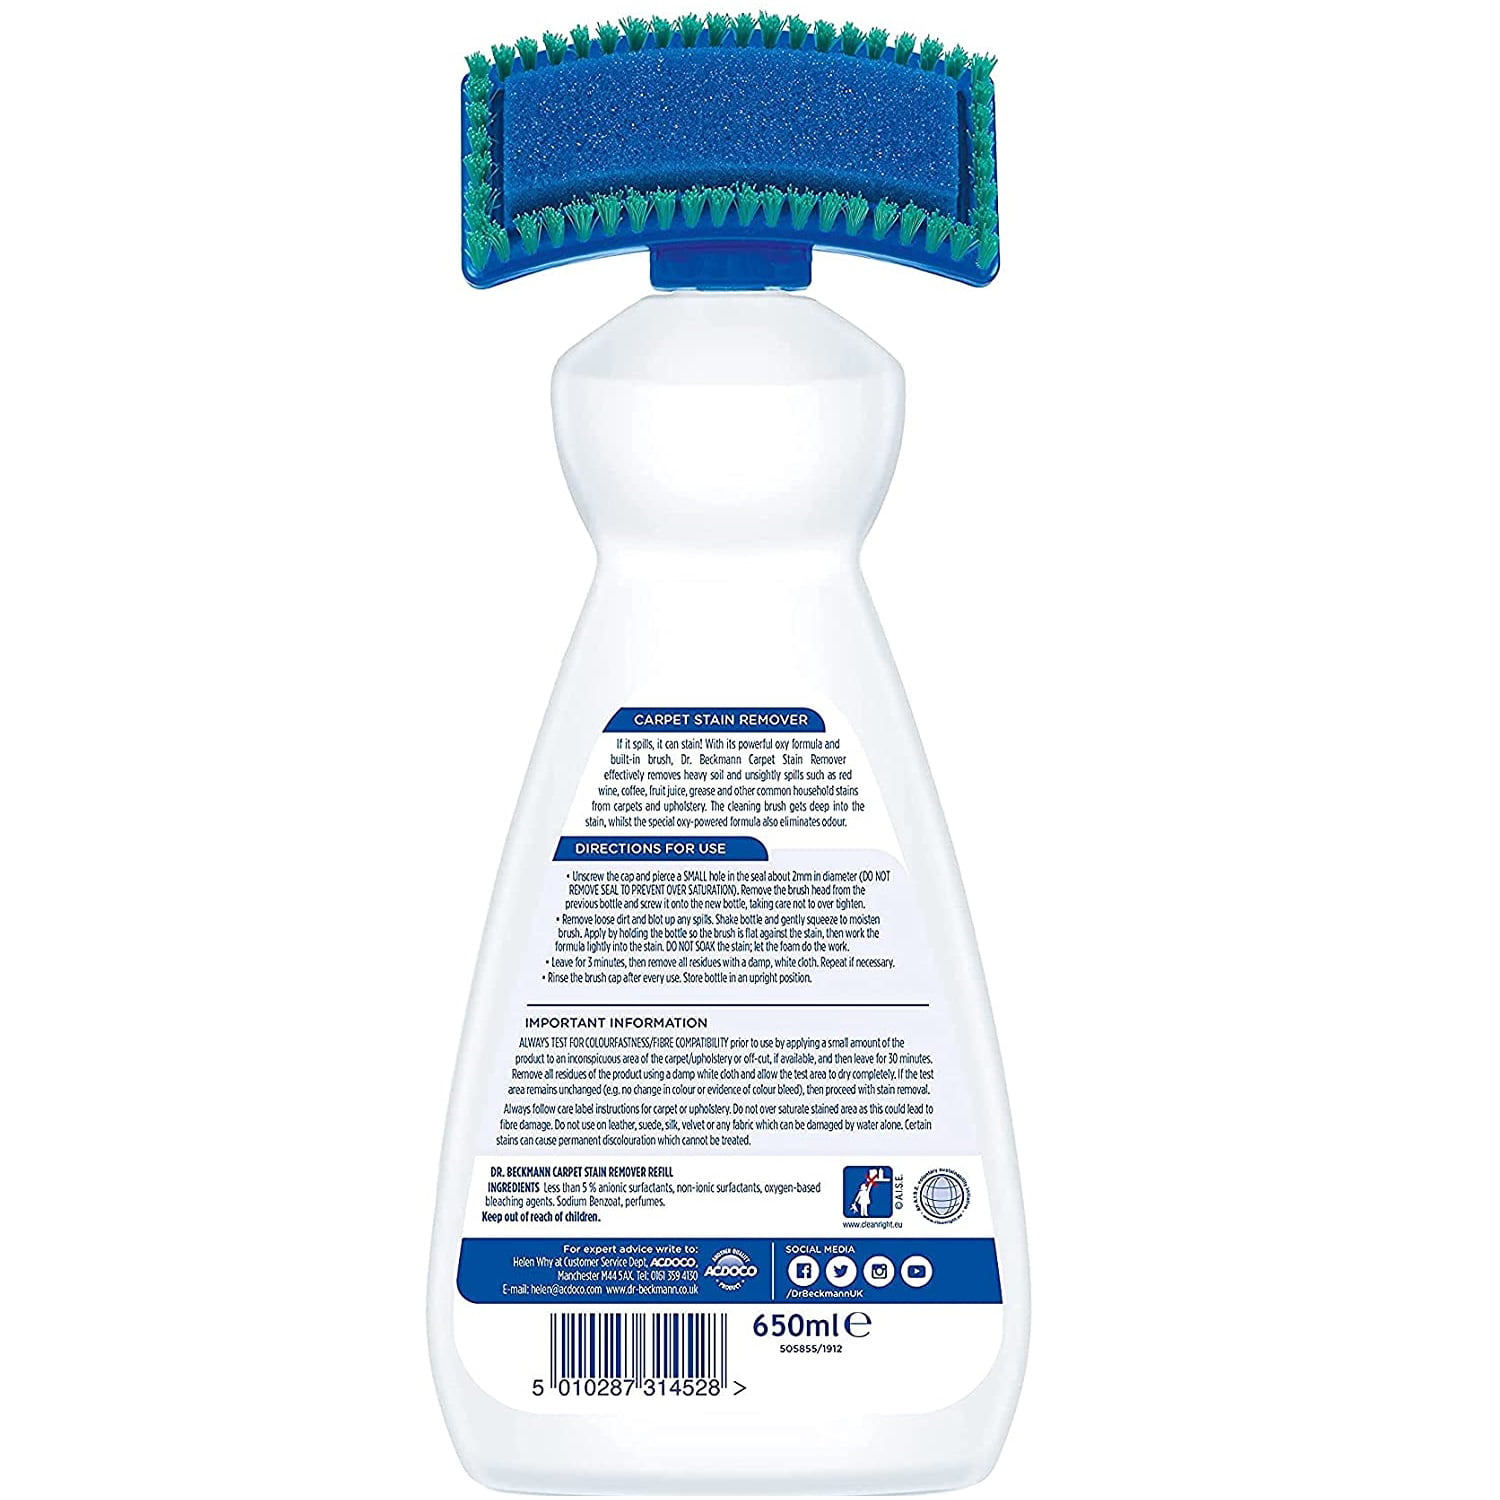 2 x Dr Beckmann Carpet Cleaner Brush 650ml, Cleaning, Upholstery, Stain  Remover by Dr Beckmann